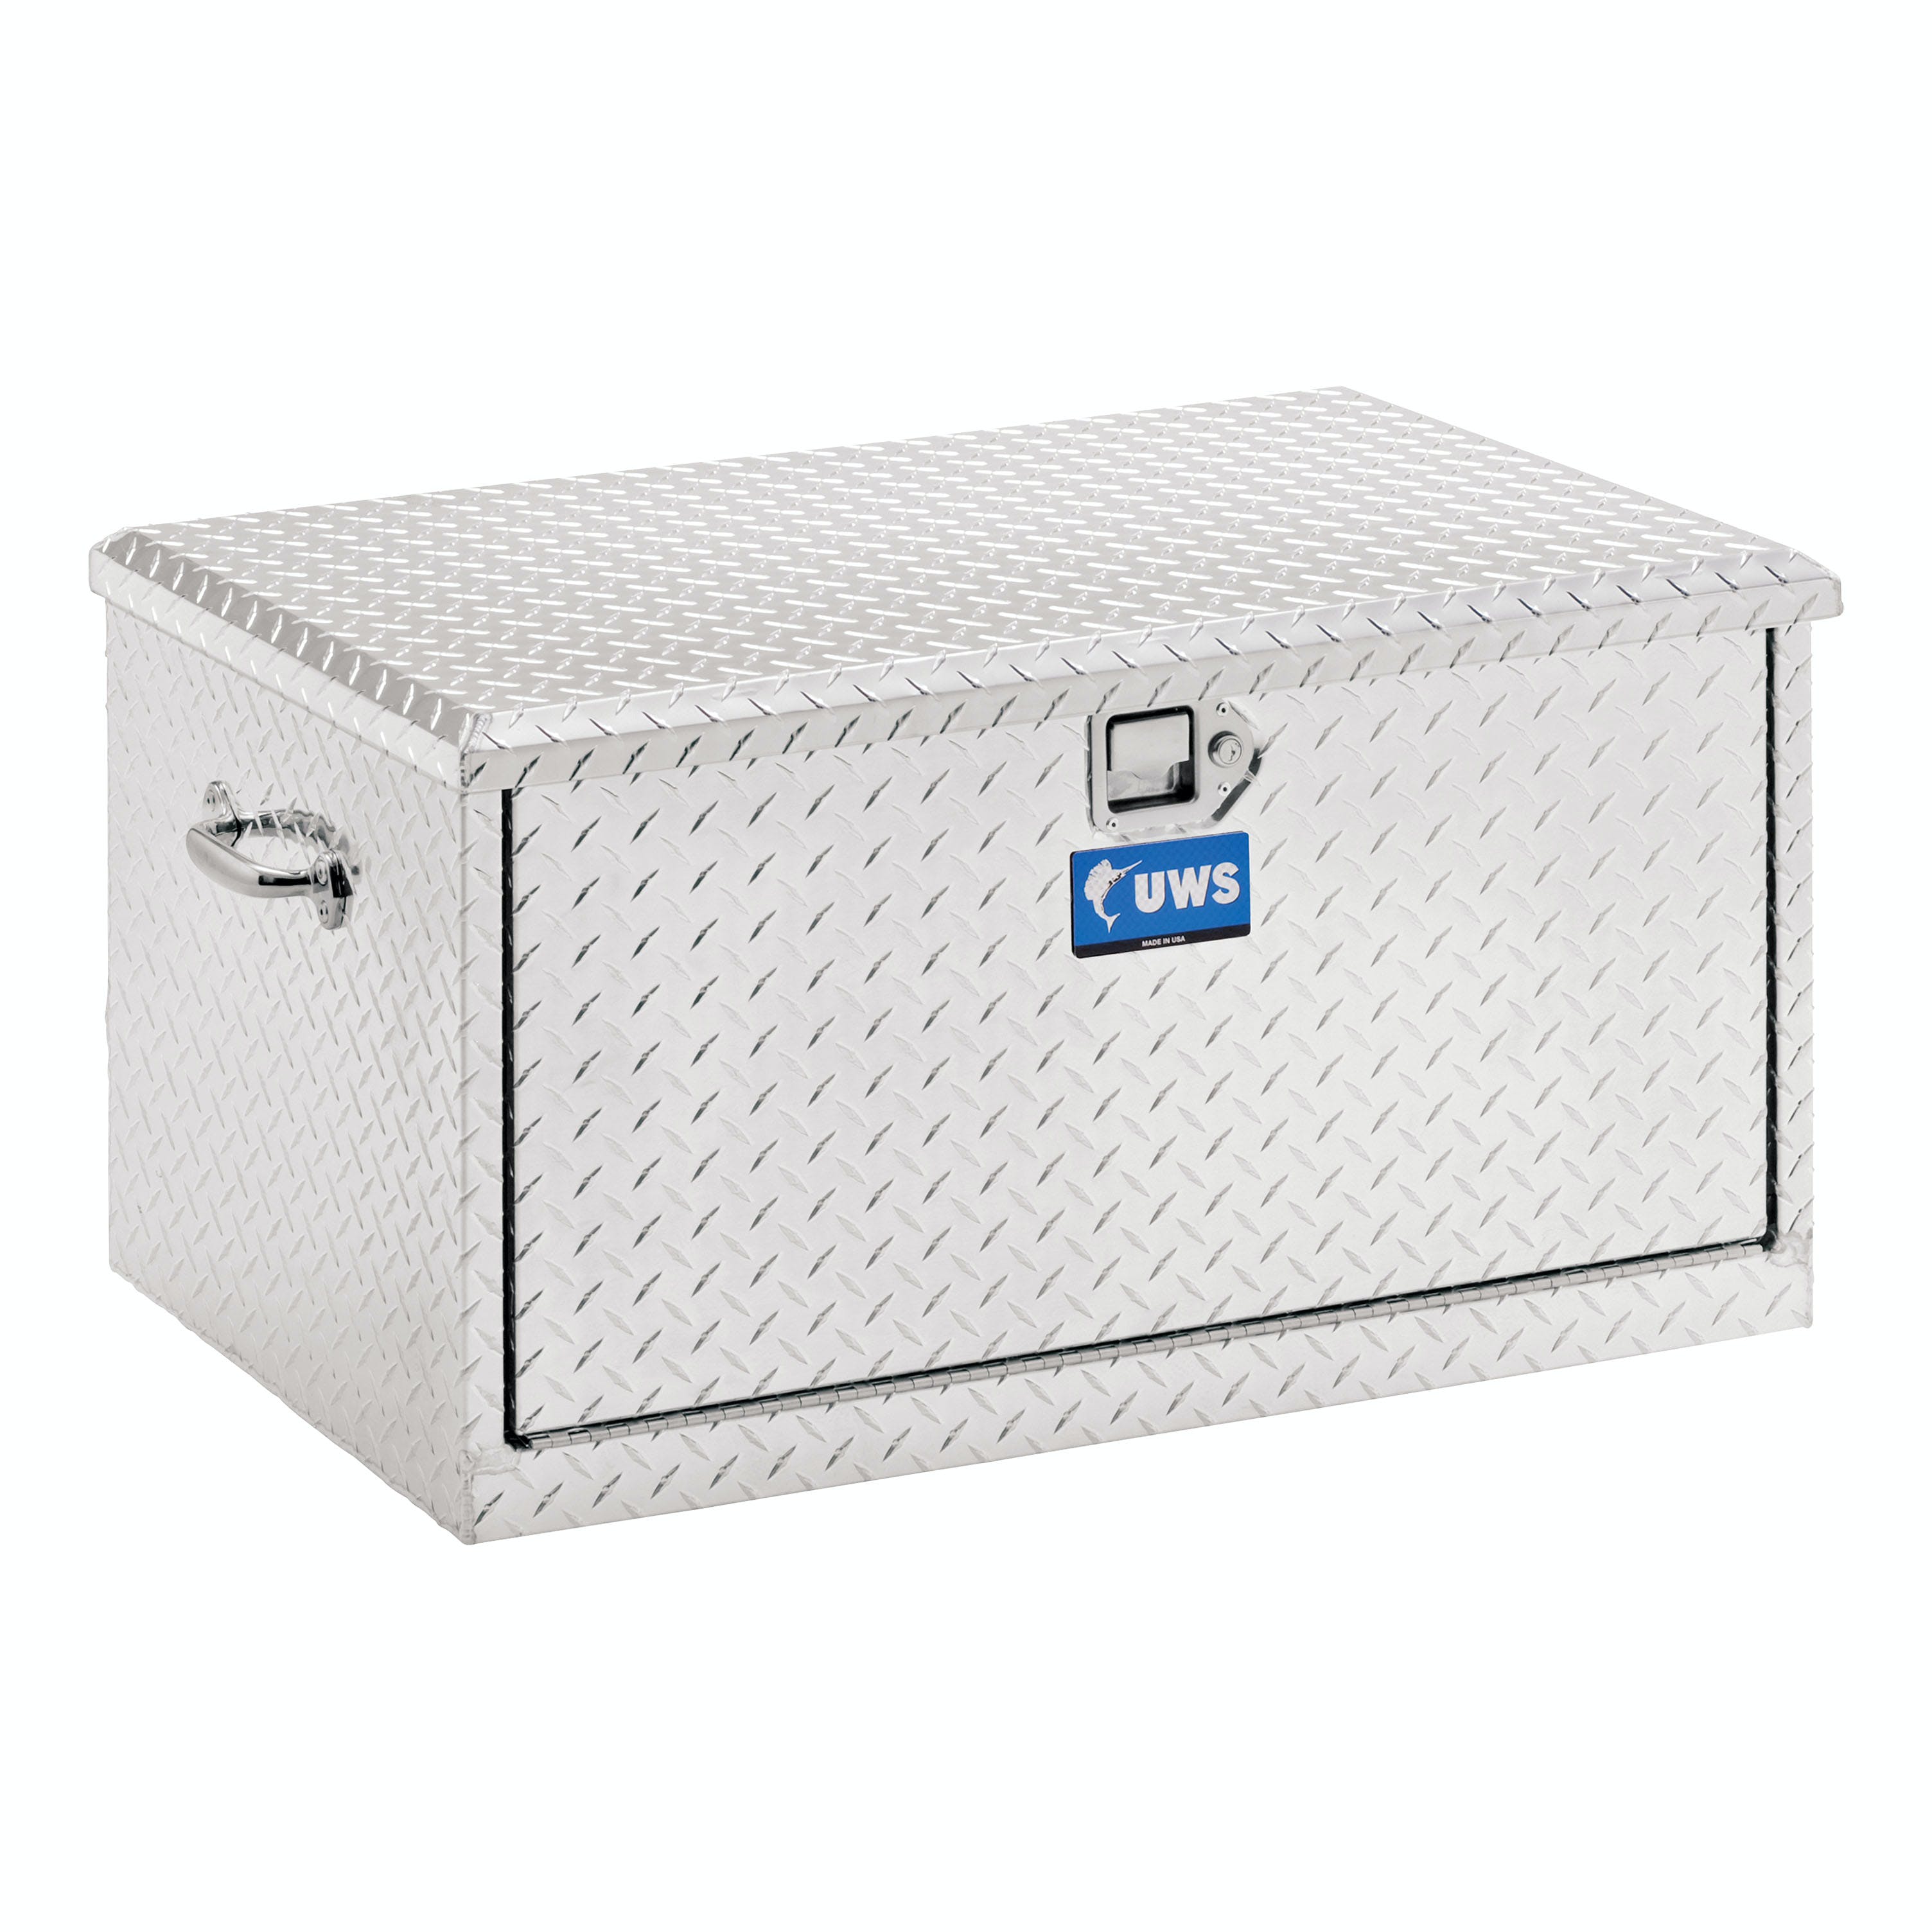 UWS TBC-38-DS 38 inch Aluminum Chest with 2 Drawer Slides